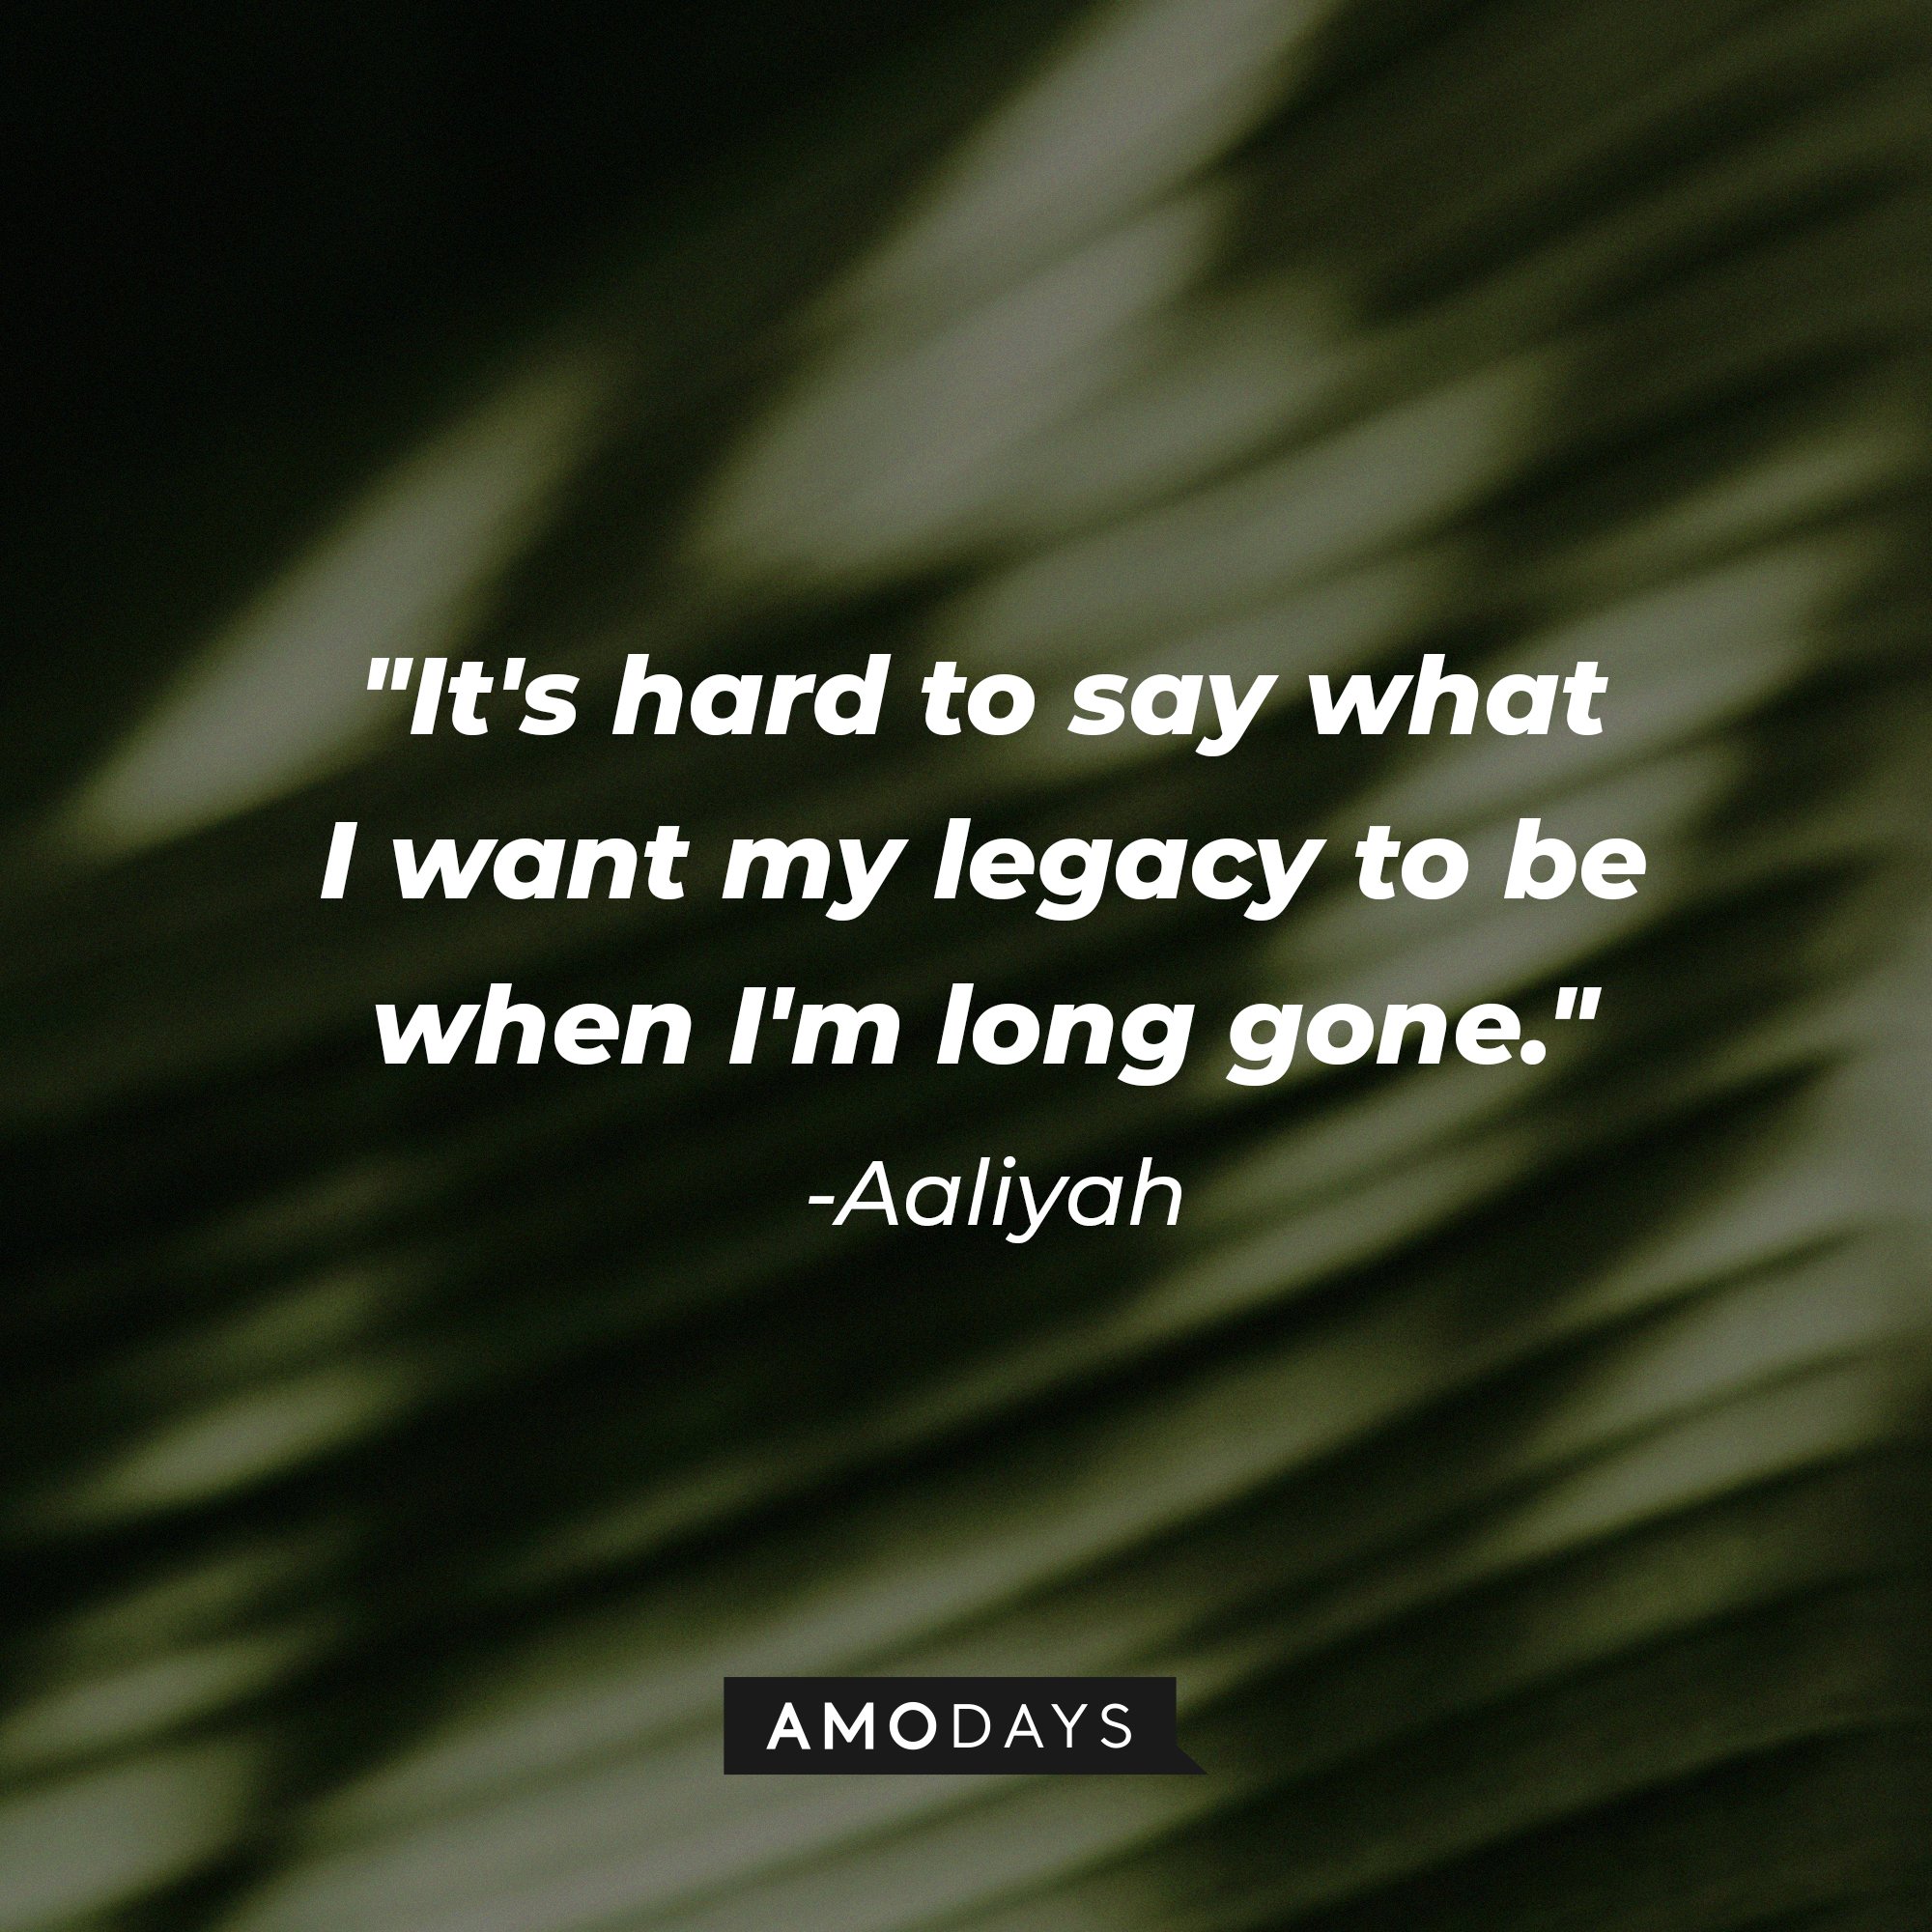 Aaliyah’s quote: "It's hard to say what I want my legacy to be when I'm long gone."  | Image: AmoDays